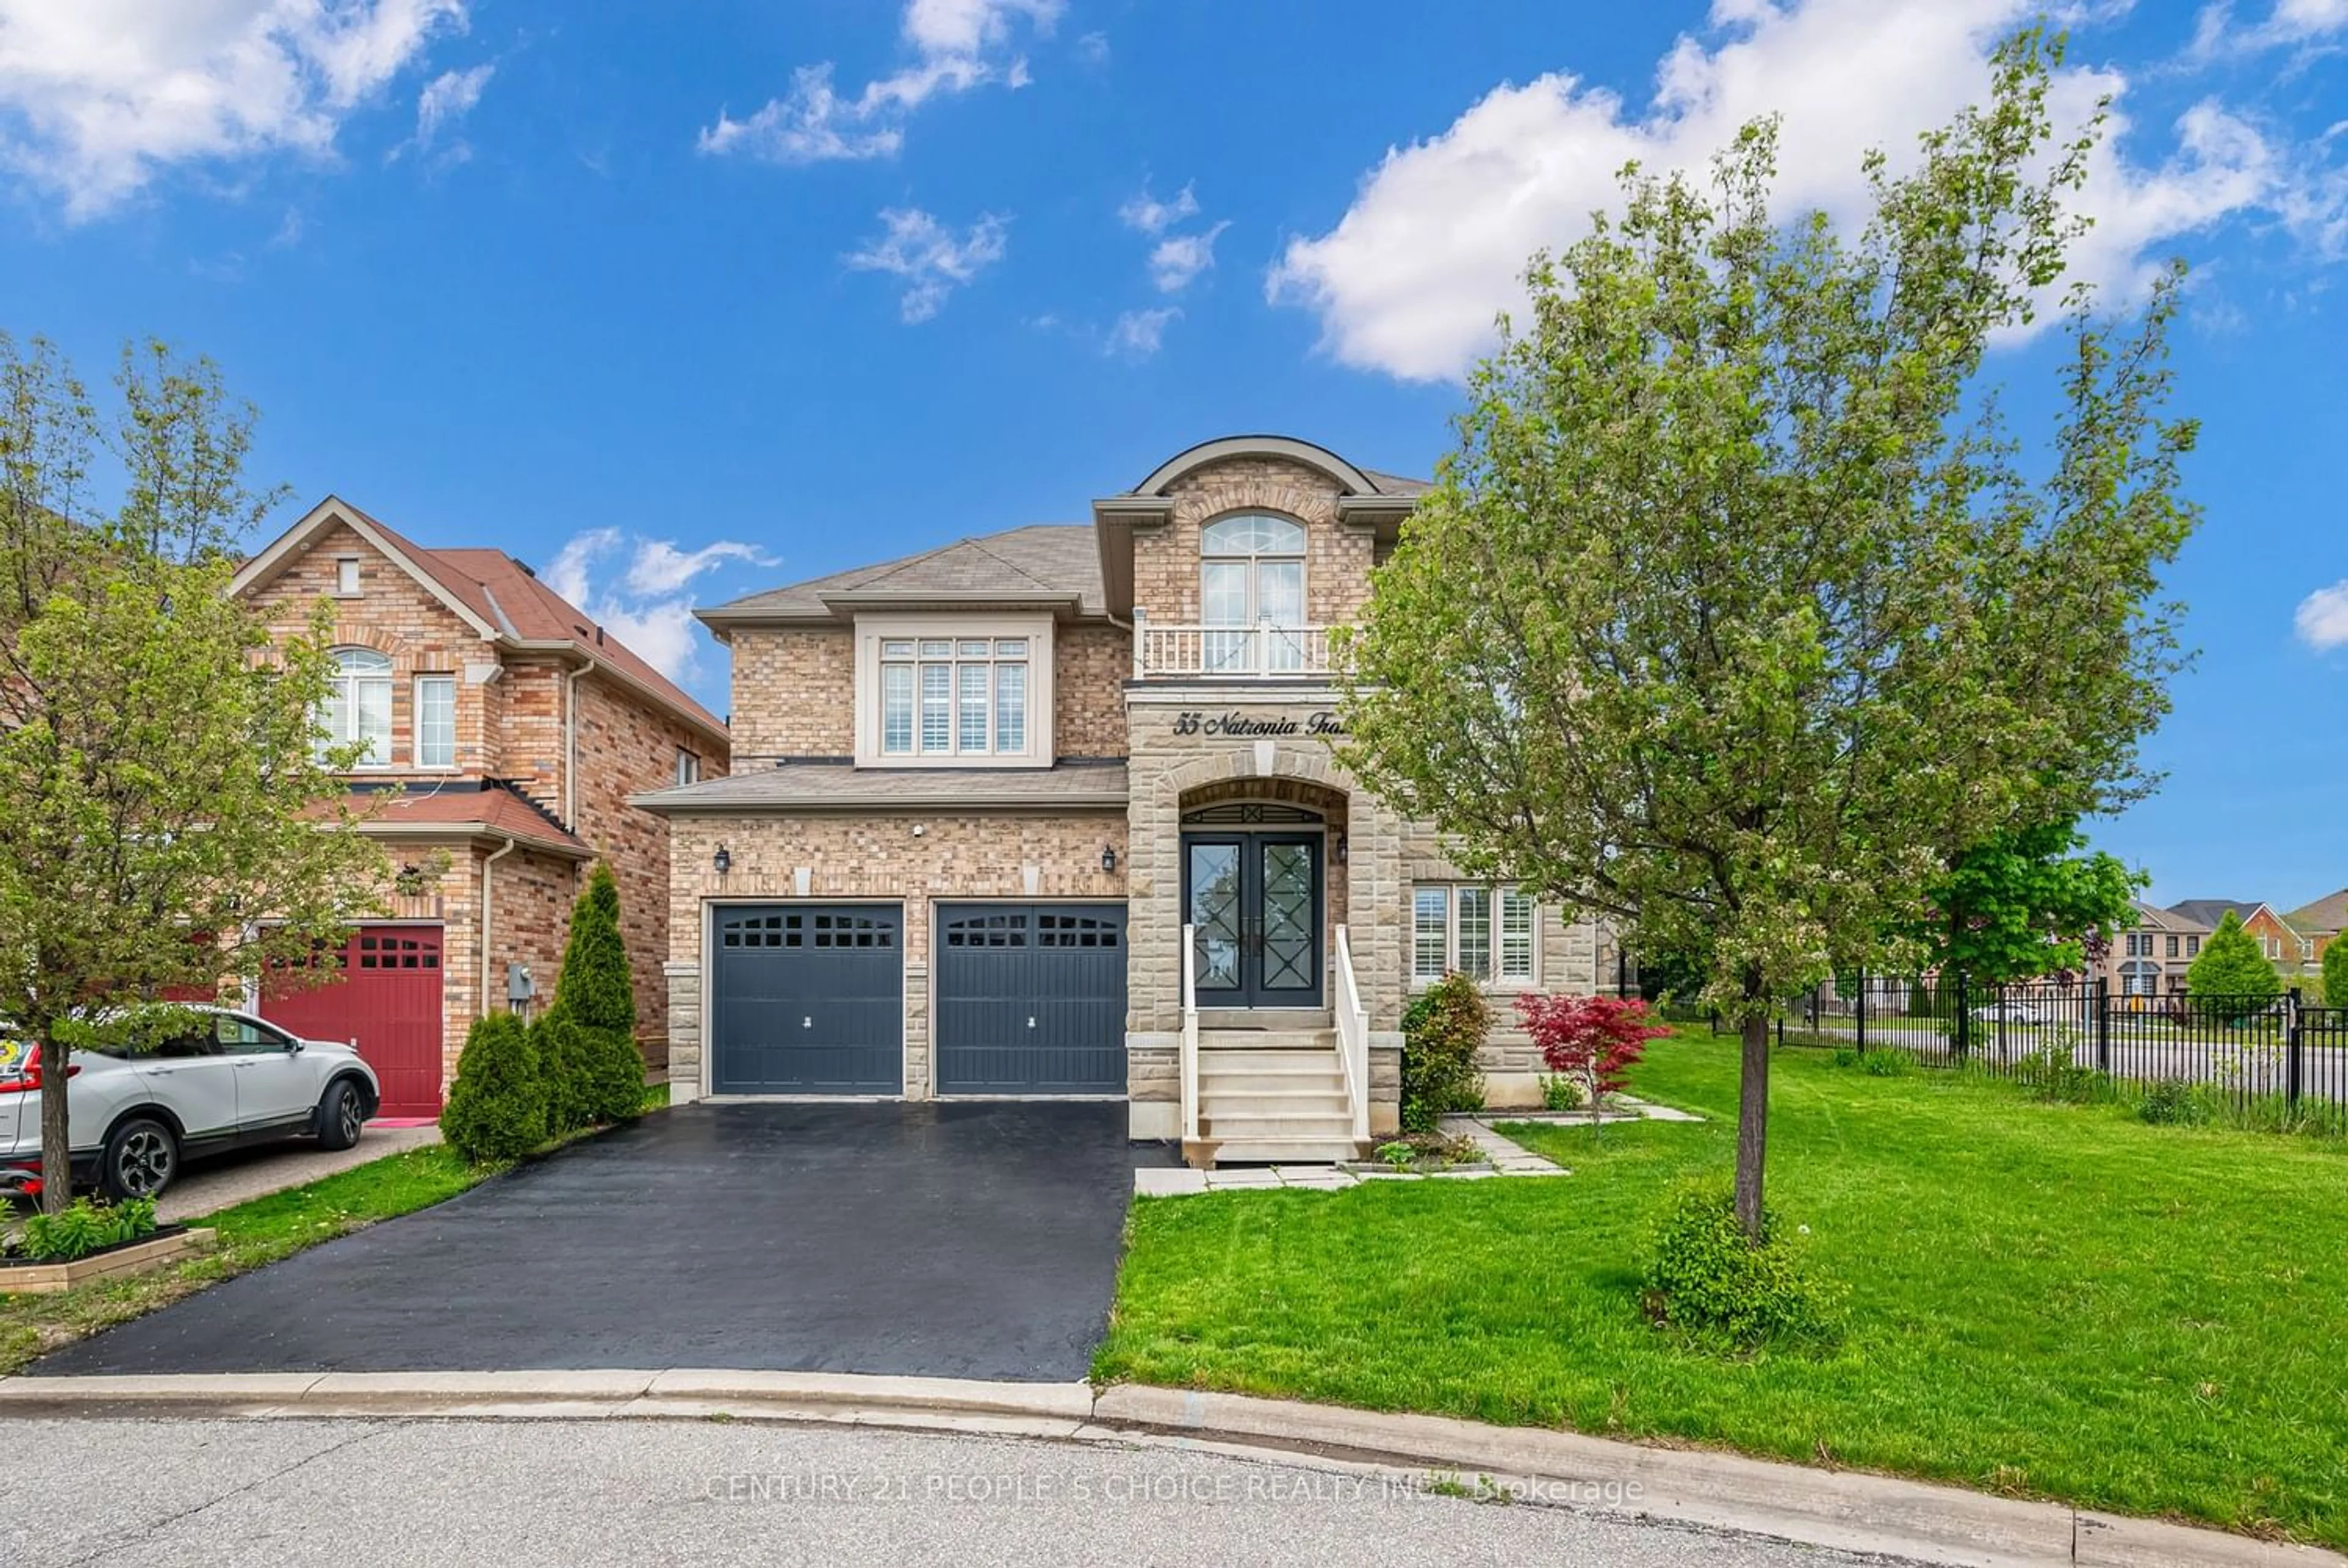 Home with brick exterior material for 55 Natronia Tr, Brampton Ontario L6P 3N8